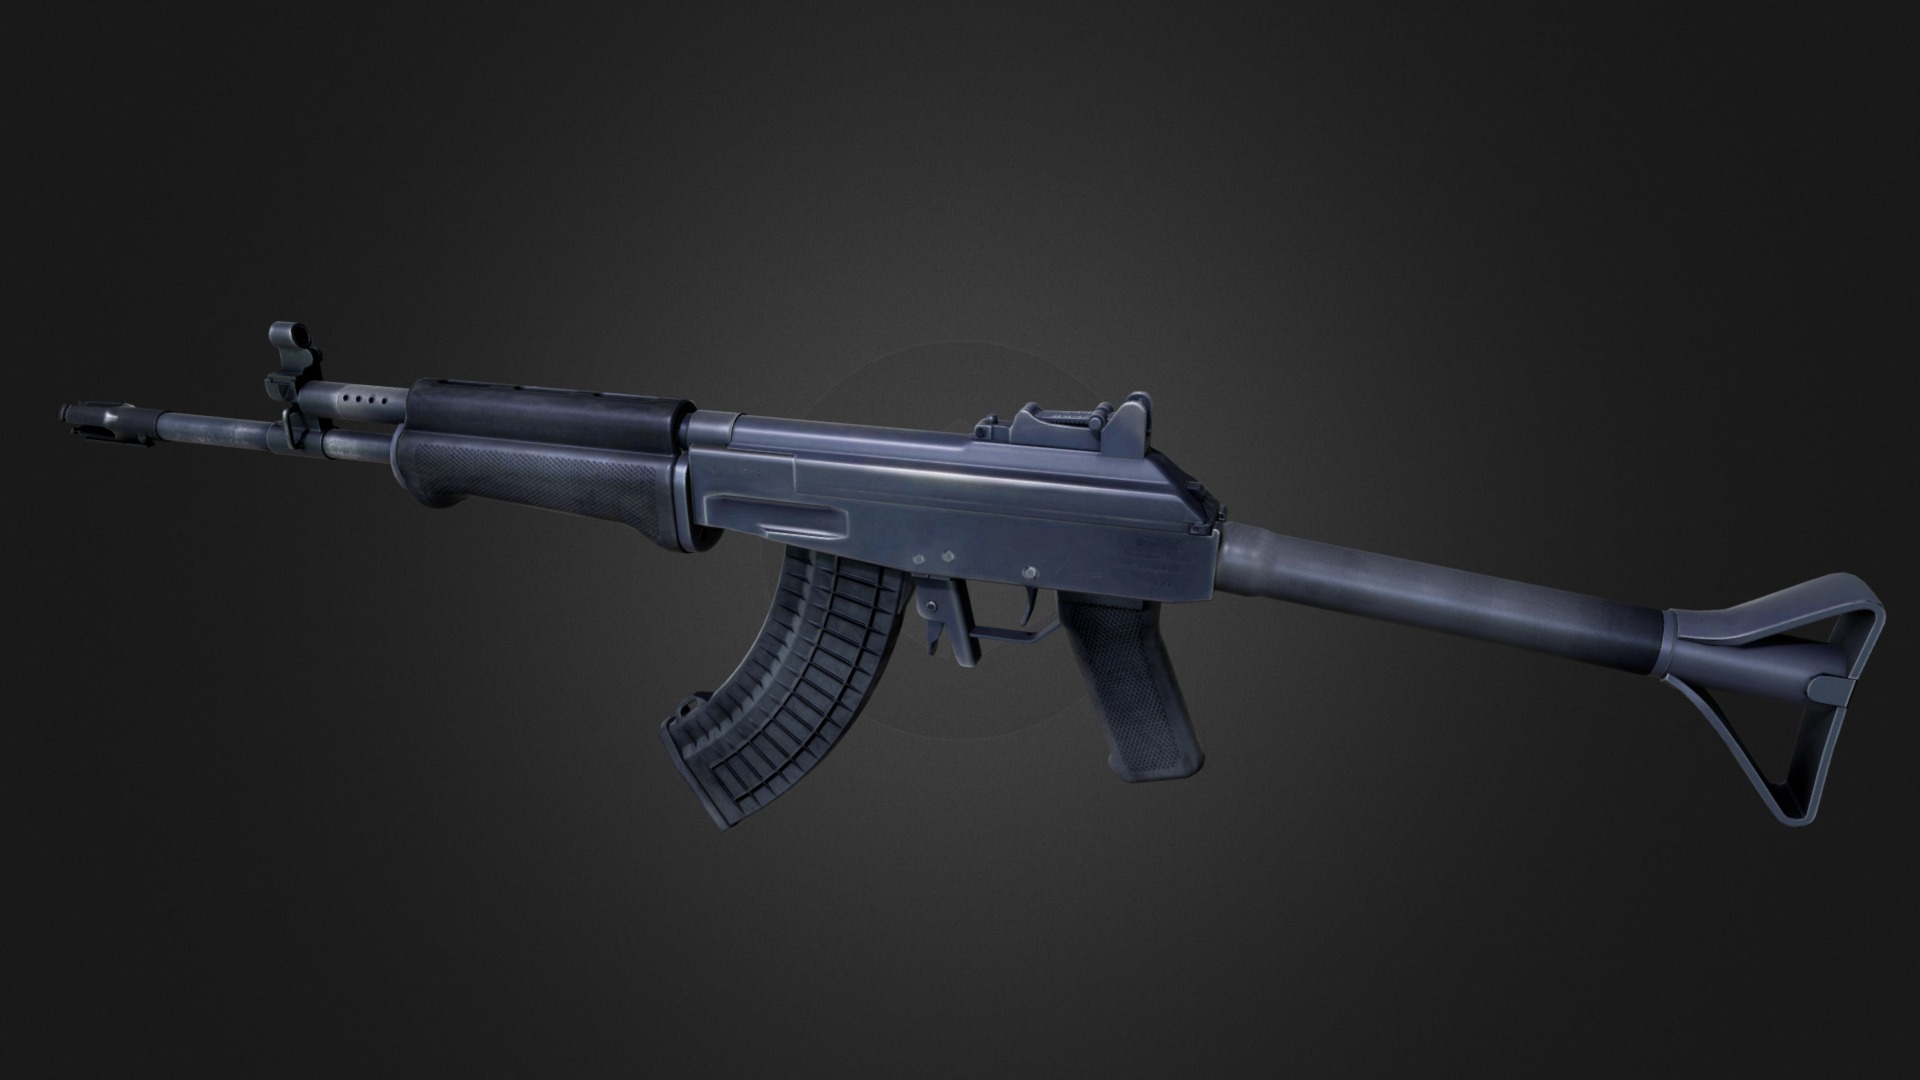 3D model RK-62 Asssault Rifle - This is a 3D model of the RK-62 Asssault Rifle. The 3D model is about a silver and black rifle.